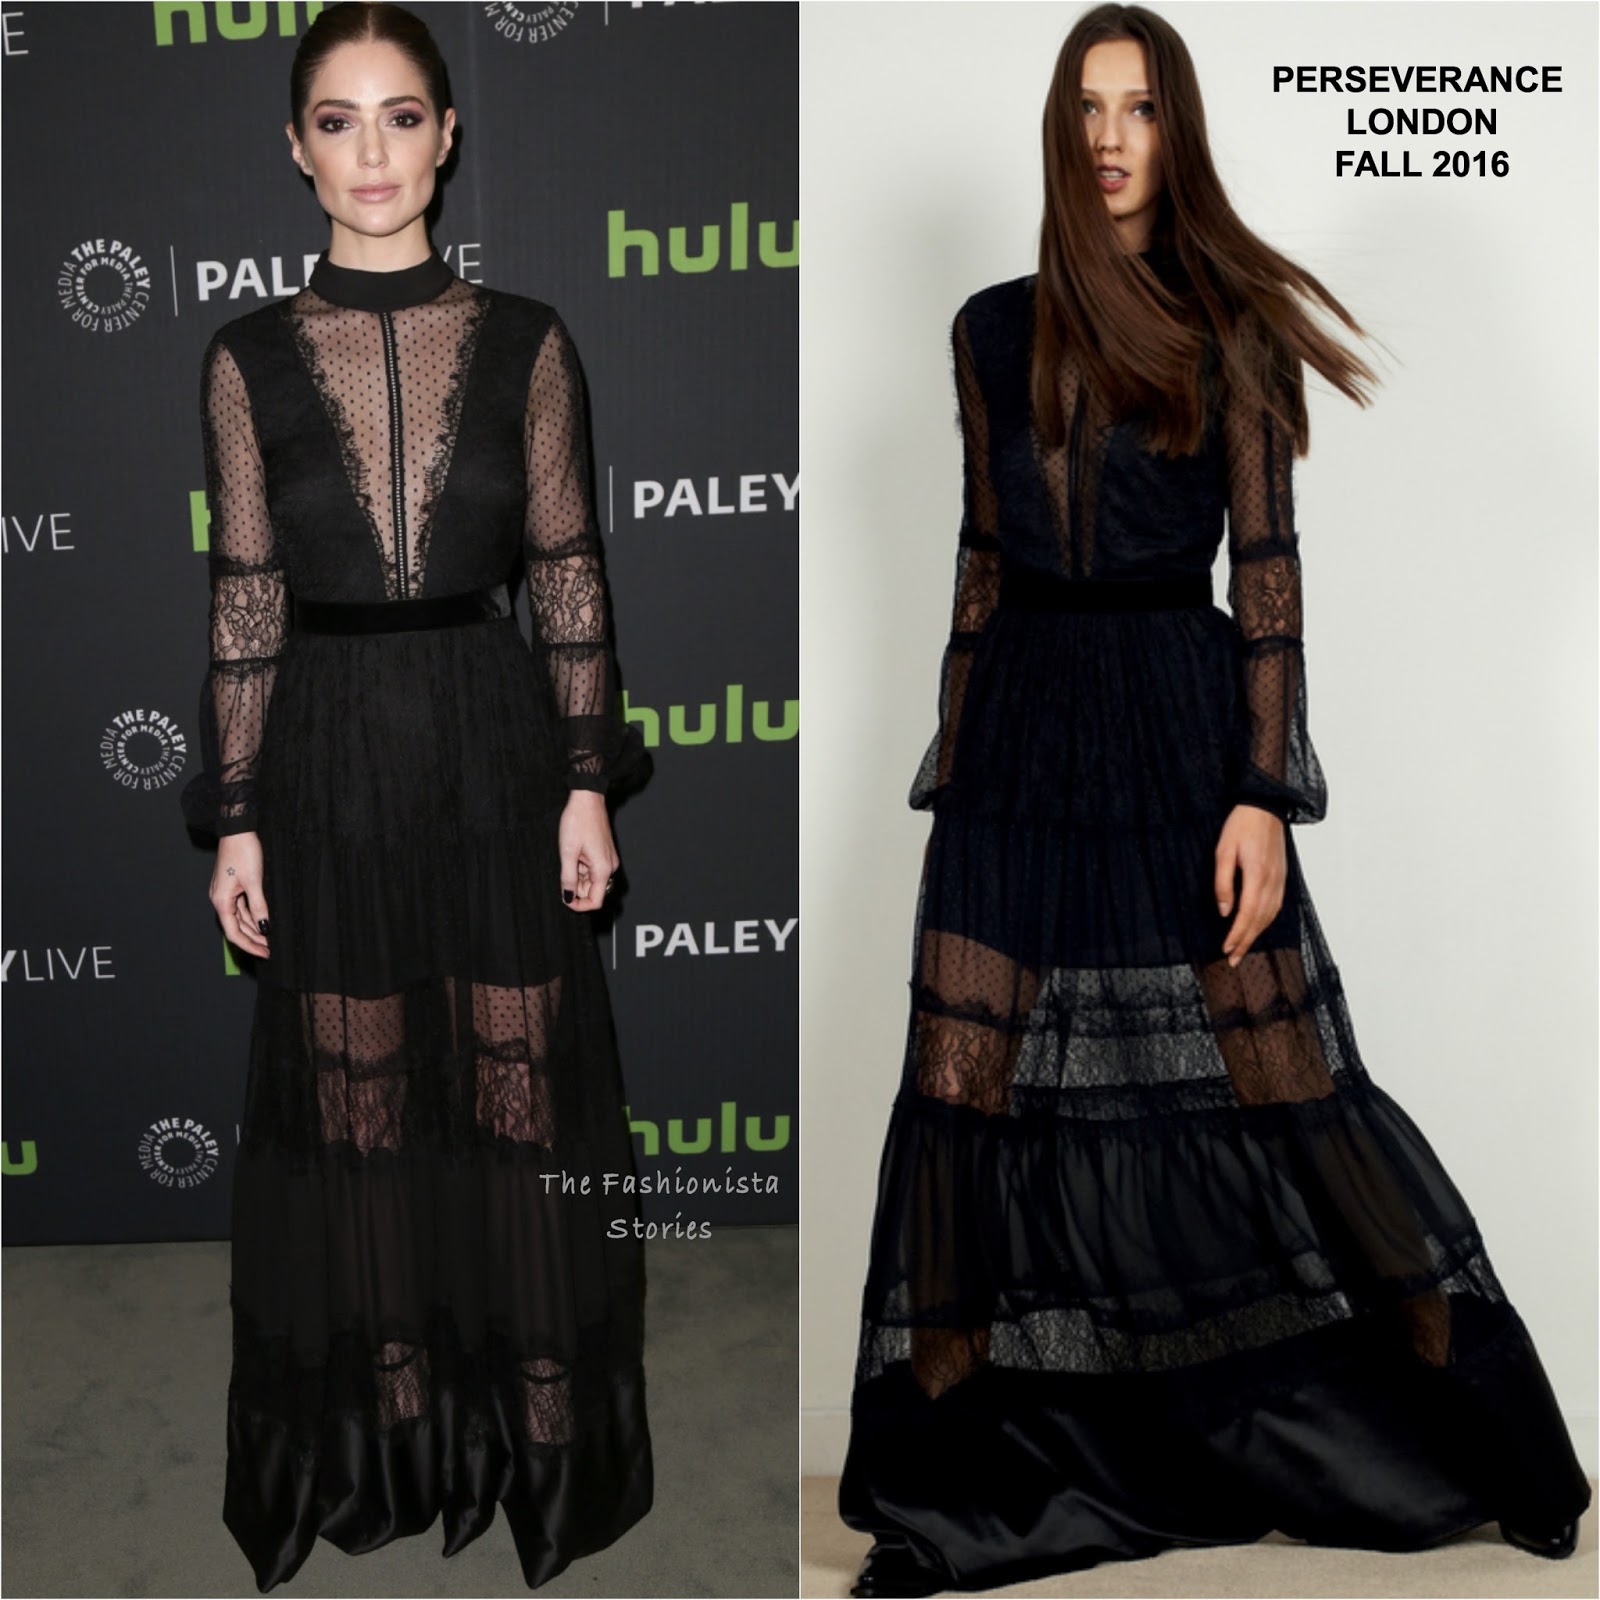 Janet Montgomery in Perseverance London at the 2016 PaleyLive LA 'Salem ...